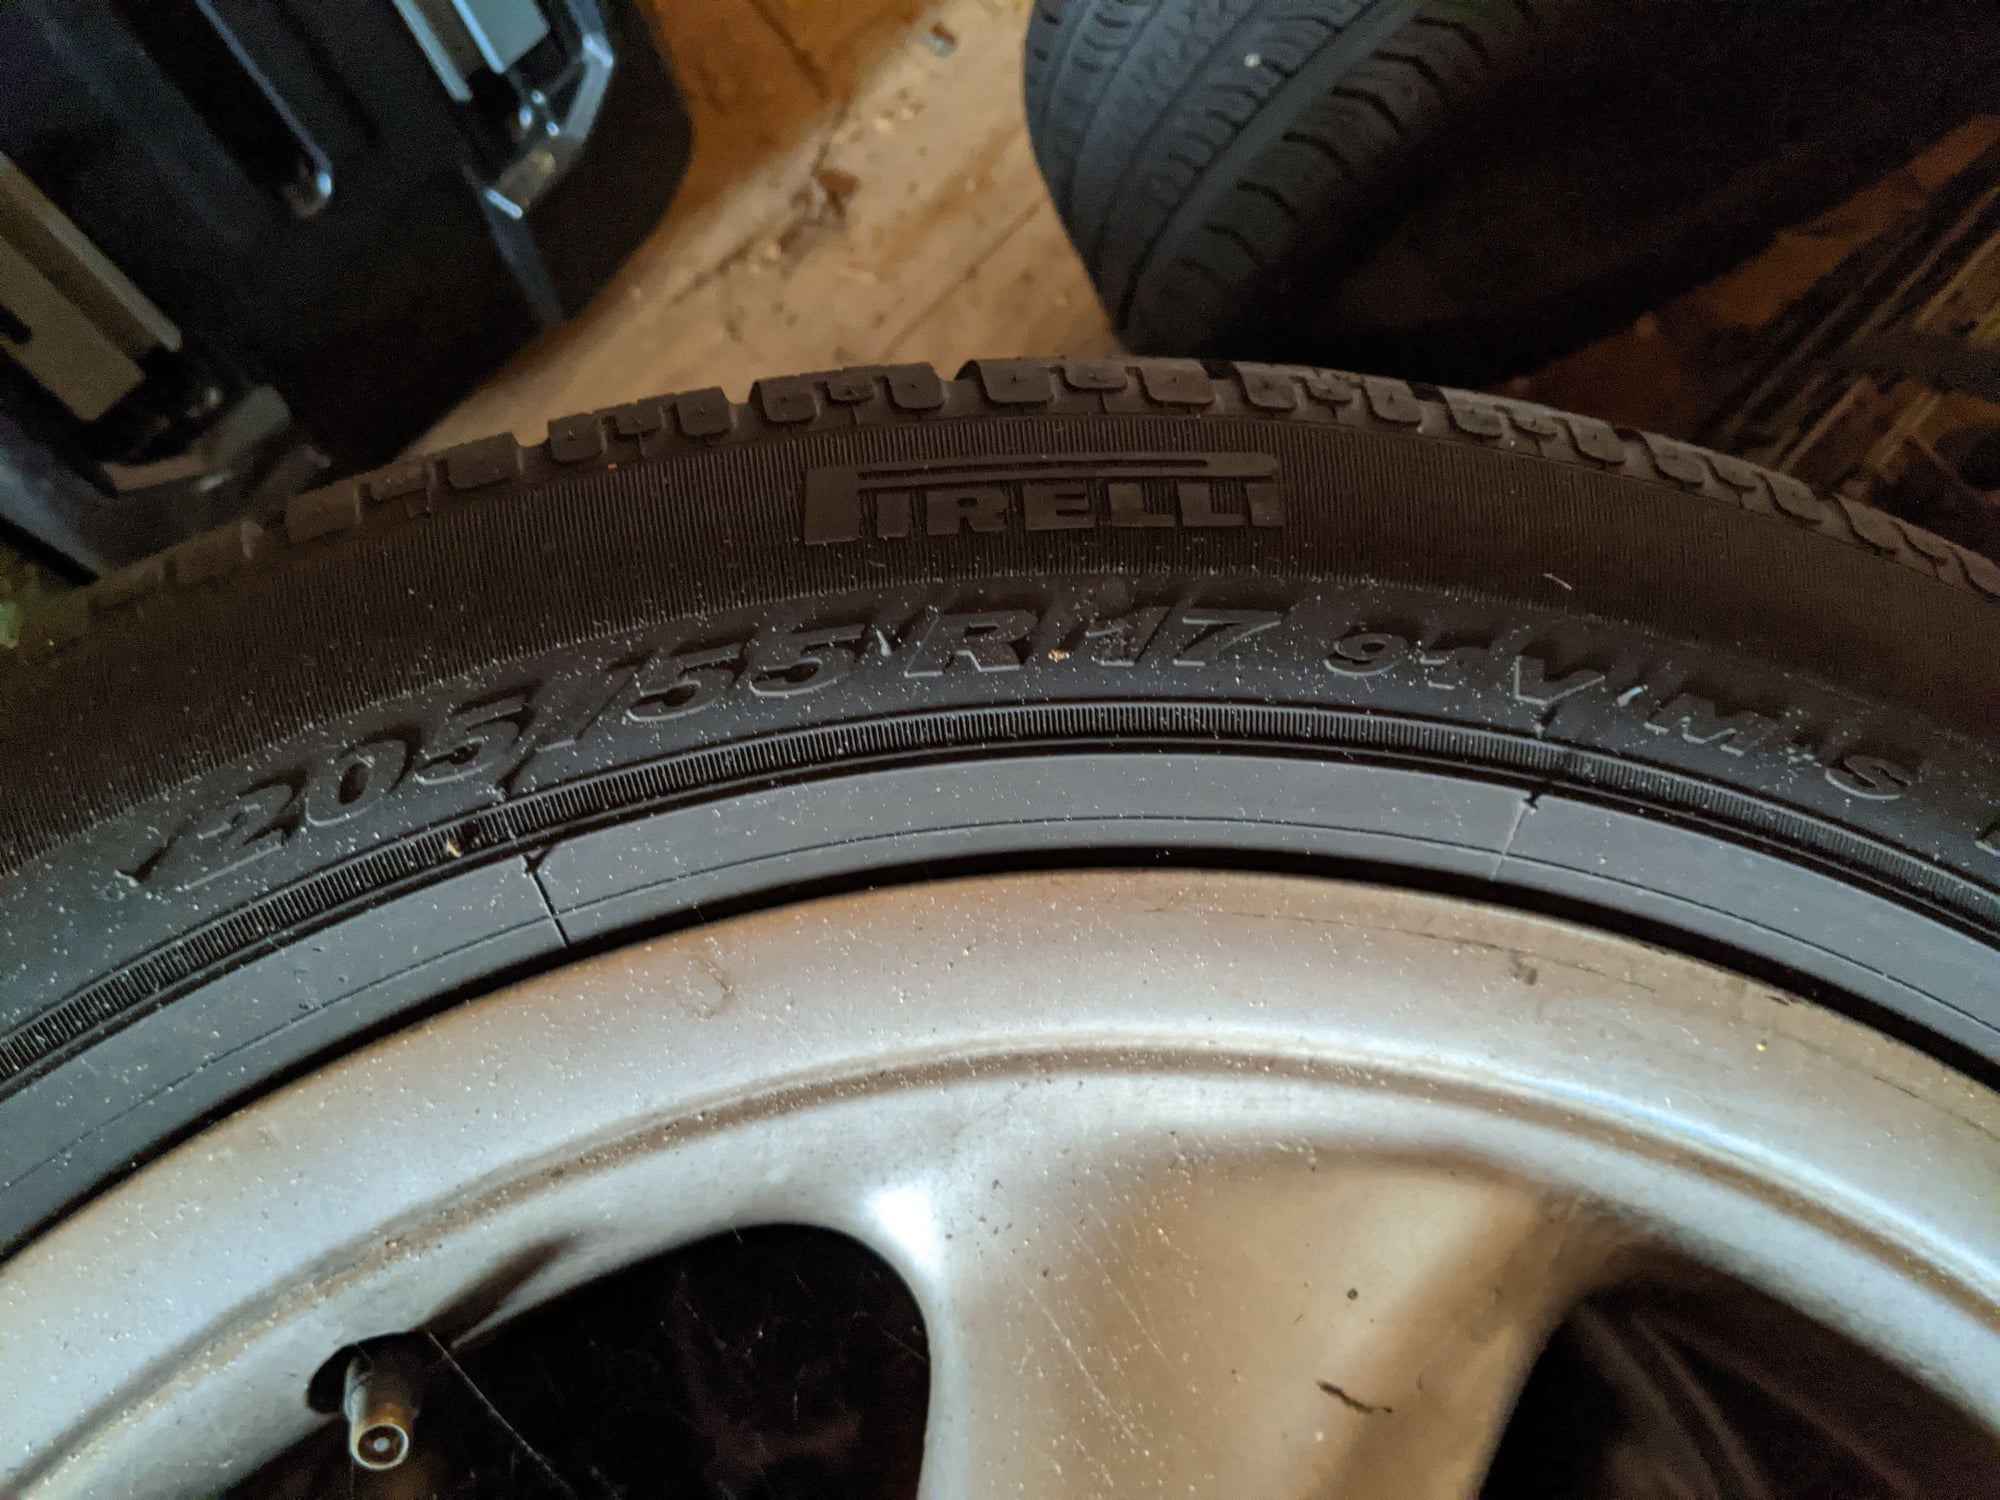 Wheels and Tires/Axles - 996/986 Winter Wheels and Tires - Used - 1999 to 2004 Porsche 911 - 1999 to 2004 Porsche Boxster - Annapolis, MD 21401, United States